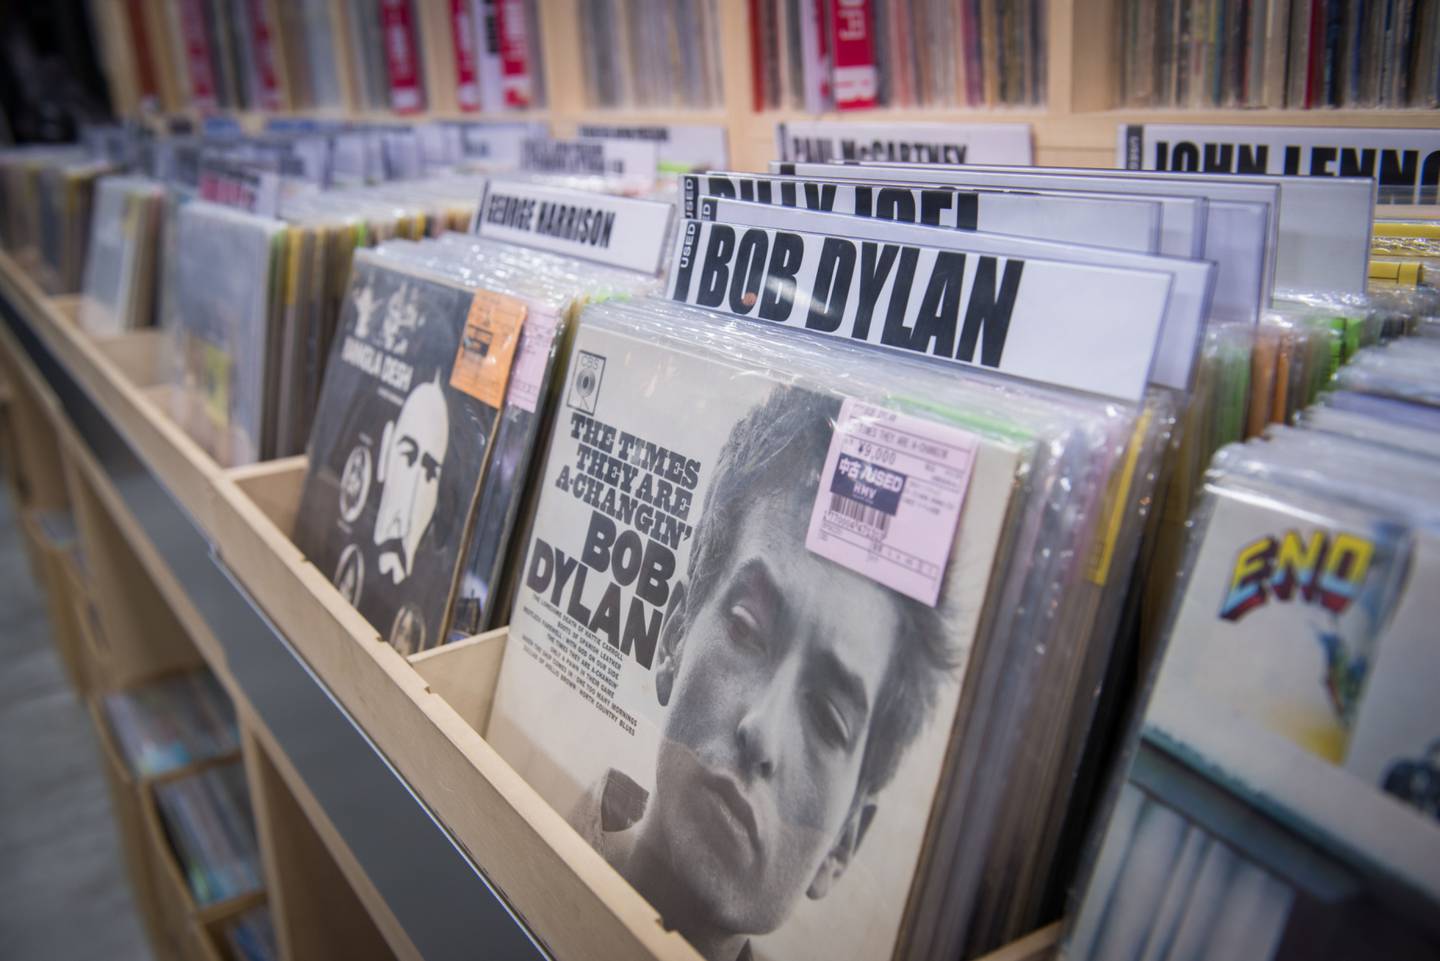 Vinyl records, including Bob Dylan's "The Times They Are A-Changin'," are displayed for sale at the HMV Record Shop operated by Lawson HMV Entertainment Inc. in the Shibuya district of Tokyo, Japan, on Wednesday, Sept. 28, 2016. Spotify Ltd. is bringing its popular online music service to Japan, a large and lucrative market where fans have demonstrated a continuing fondness for CDs and even vinyl records. Photographer: Noriko Hayashi/Bloomberg